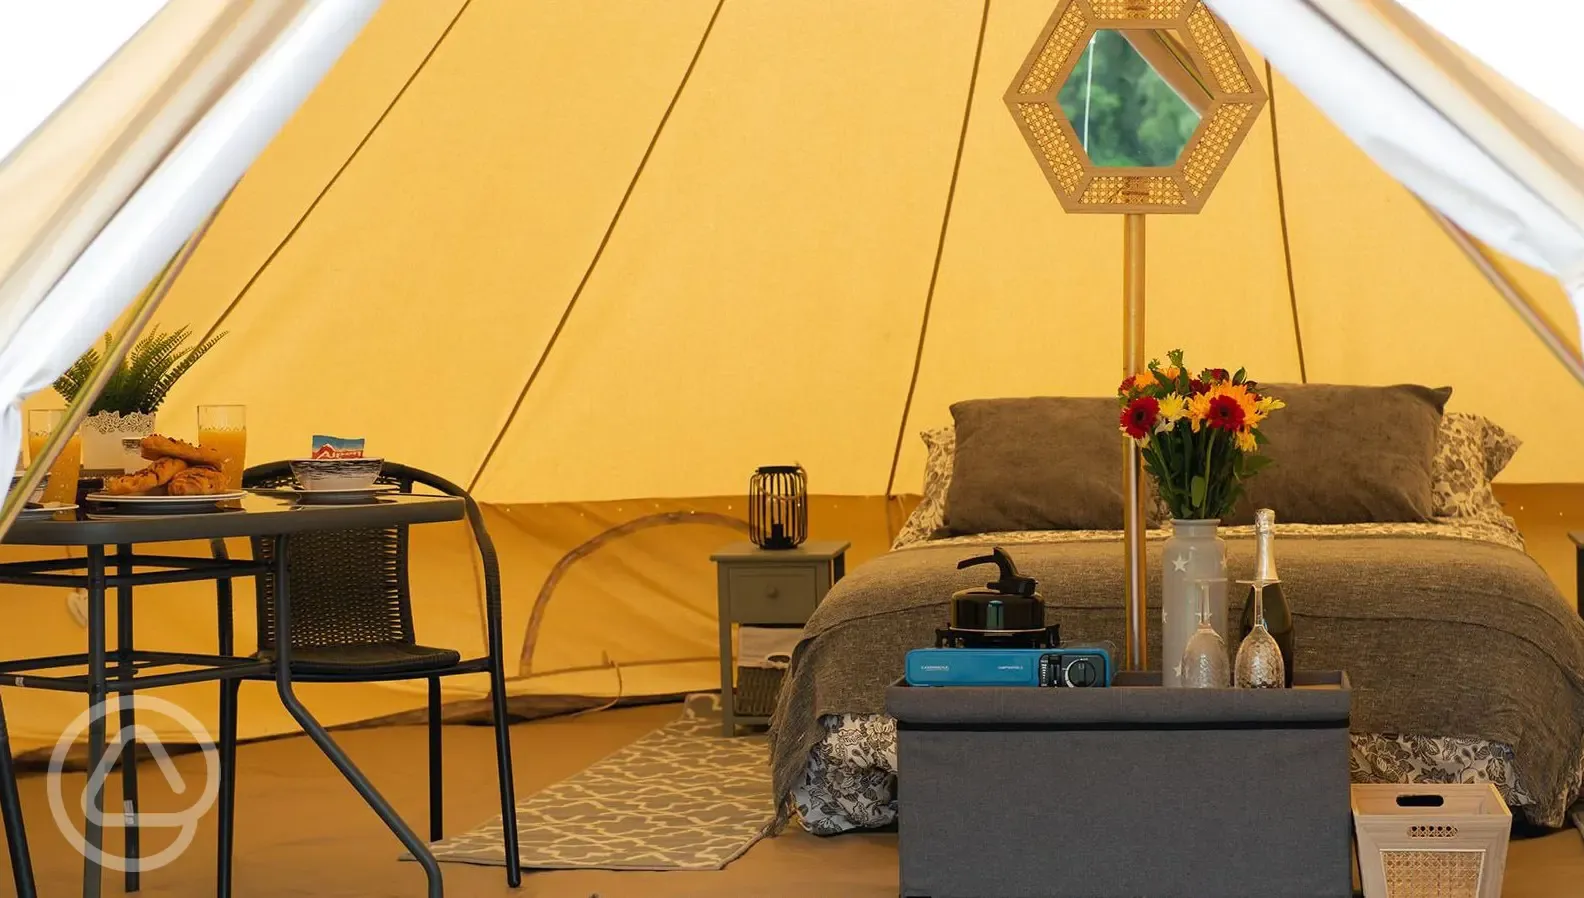 Enter the bell tent